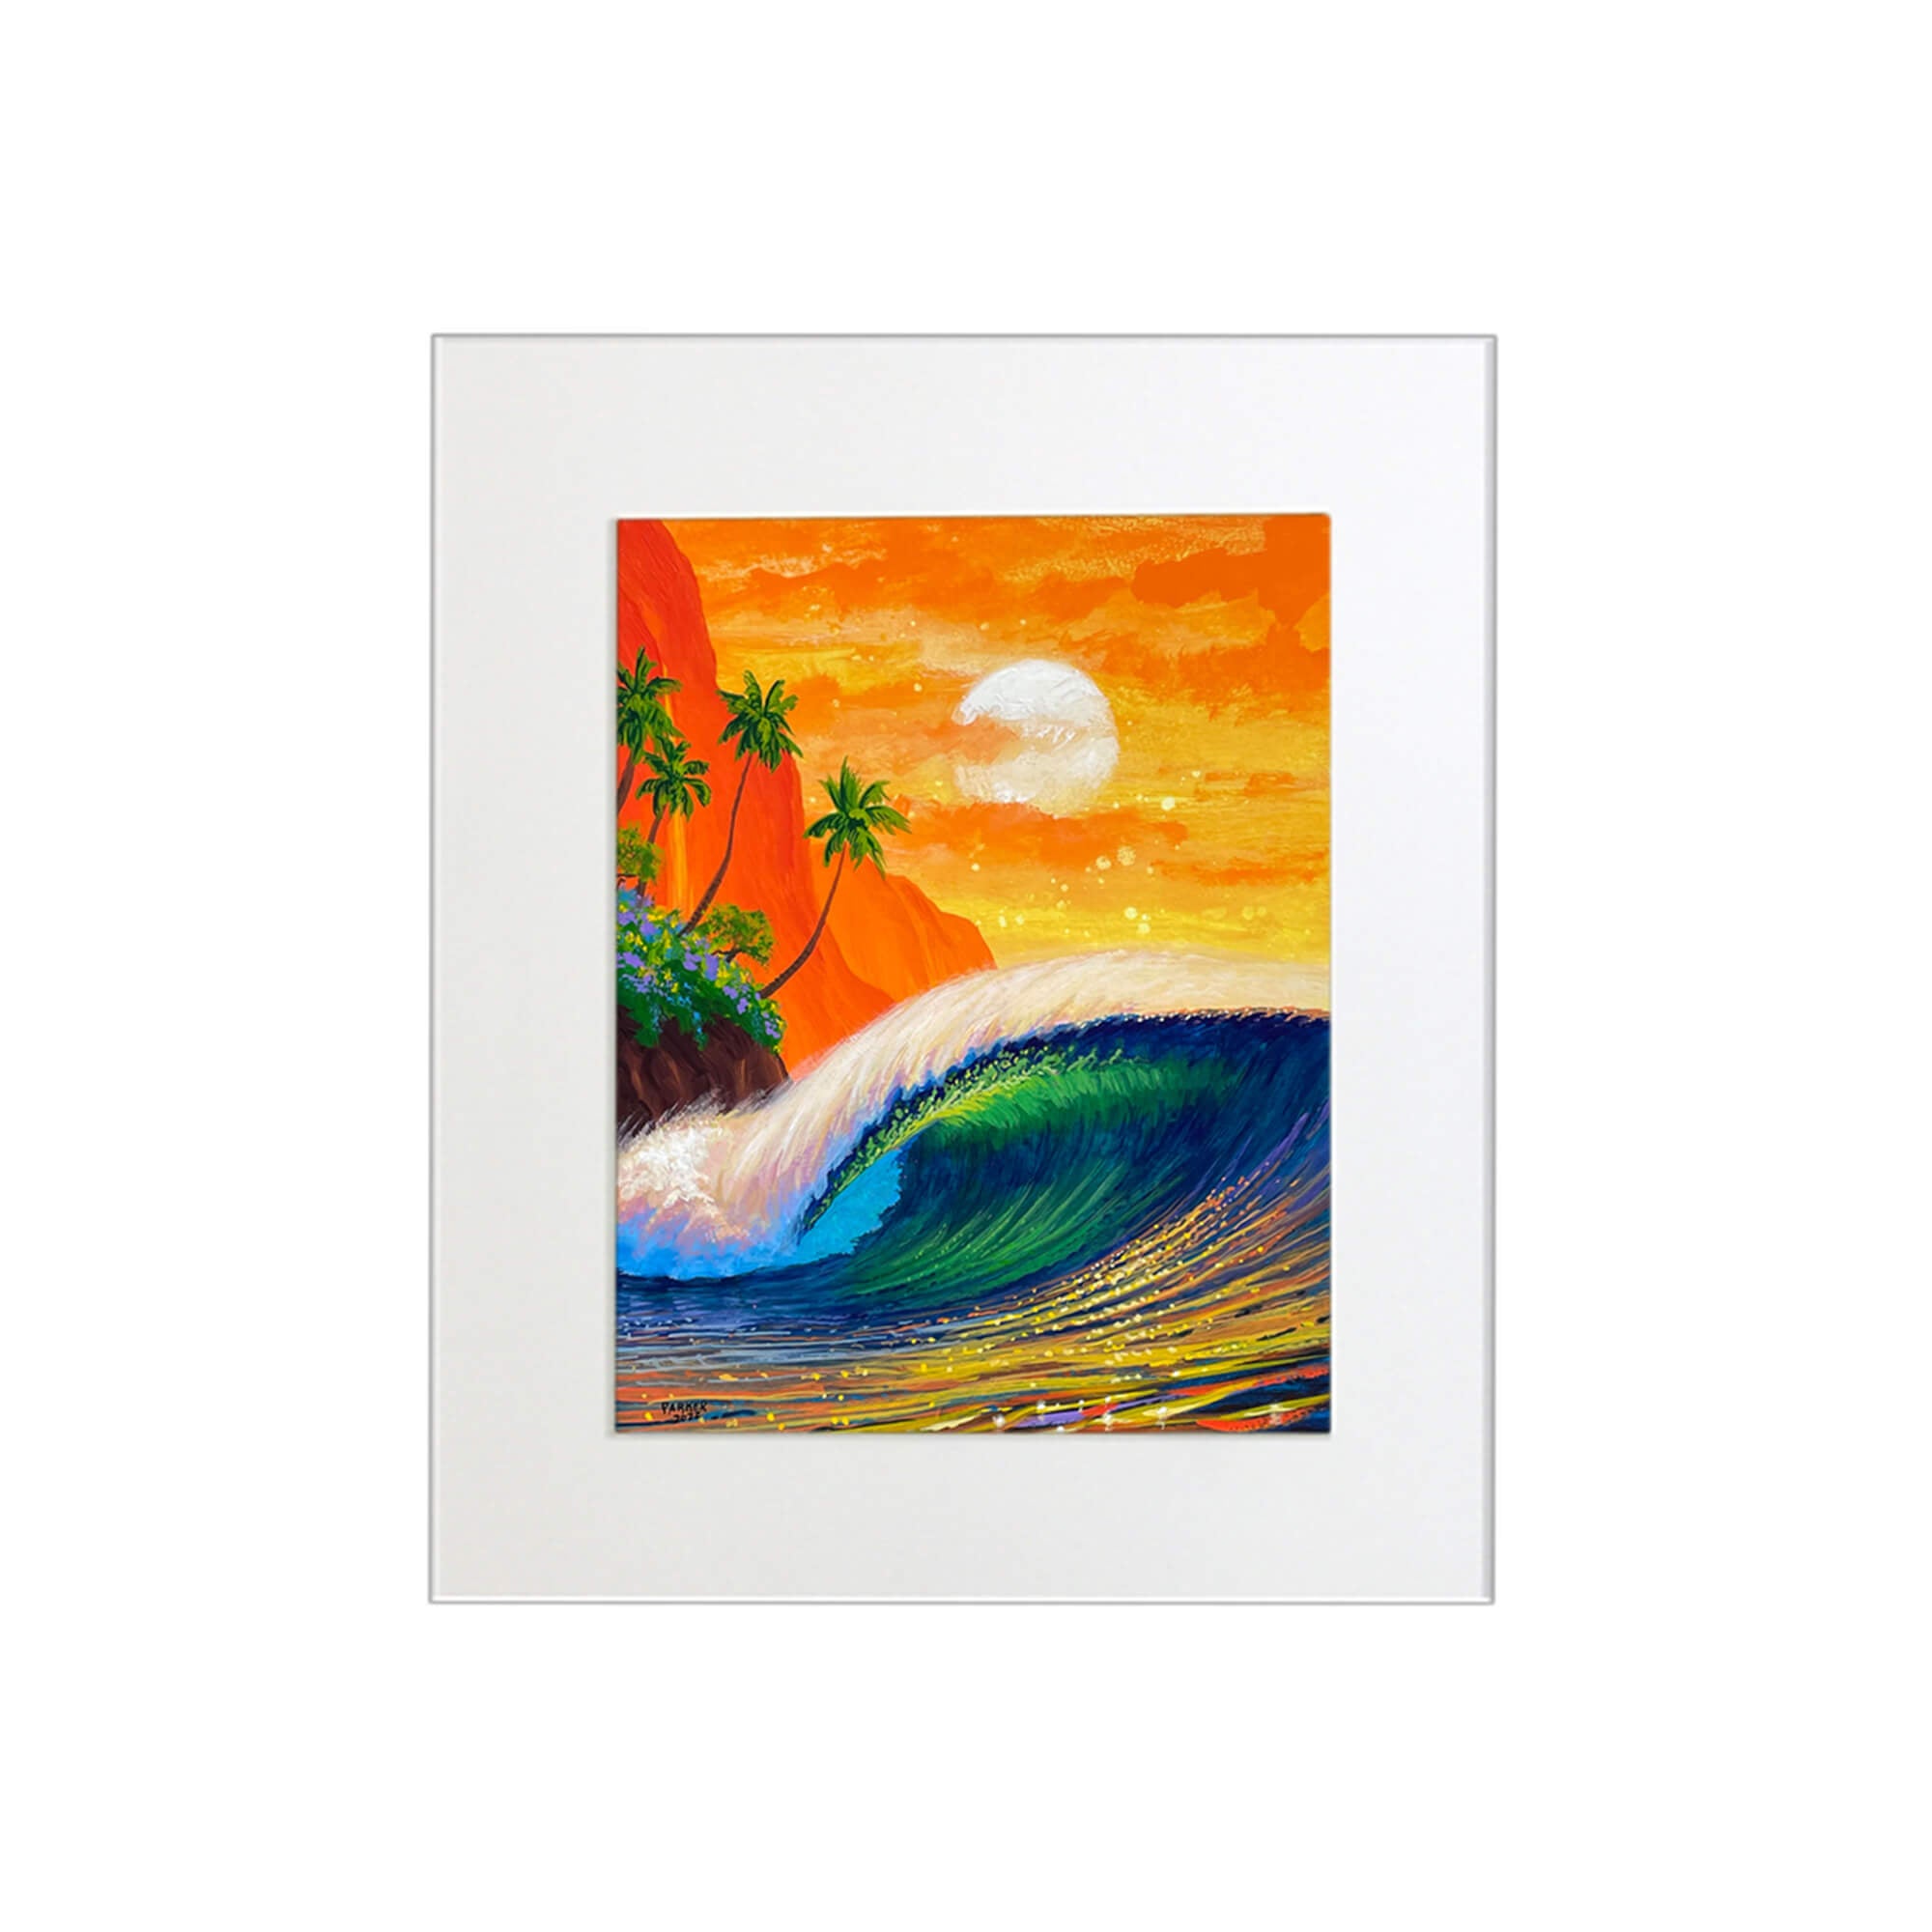 Colorful rolling wave and a classic Hawaiian seascape by wave artist Patrick Parker